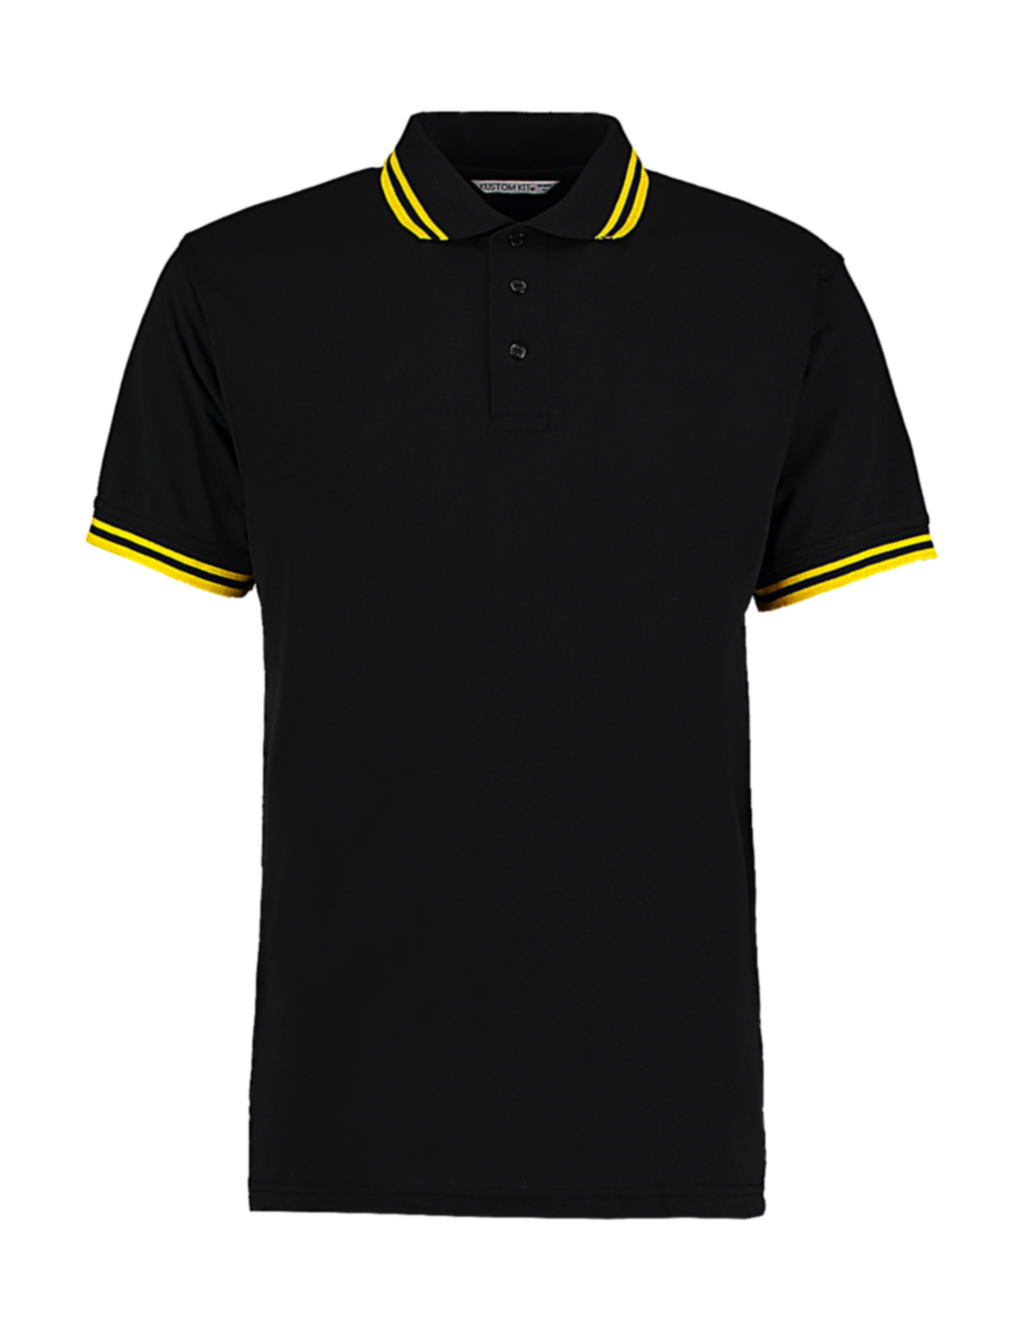  Classic Fit Tipped Collar Polo in Farbe Black/Yellow